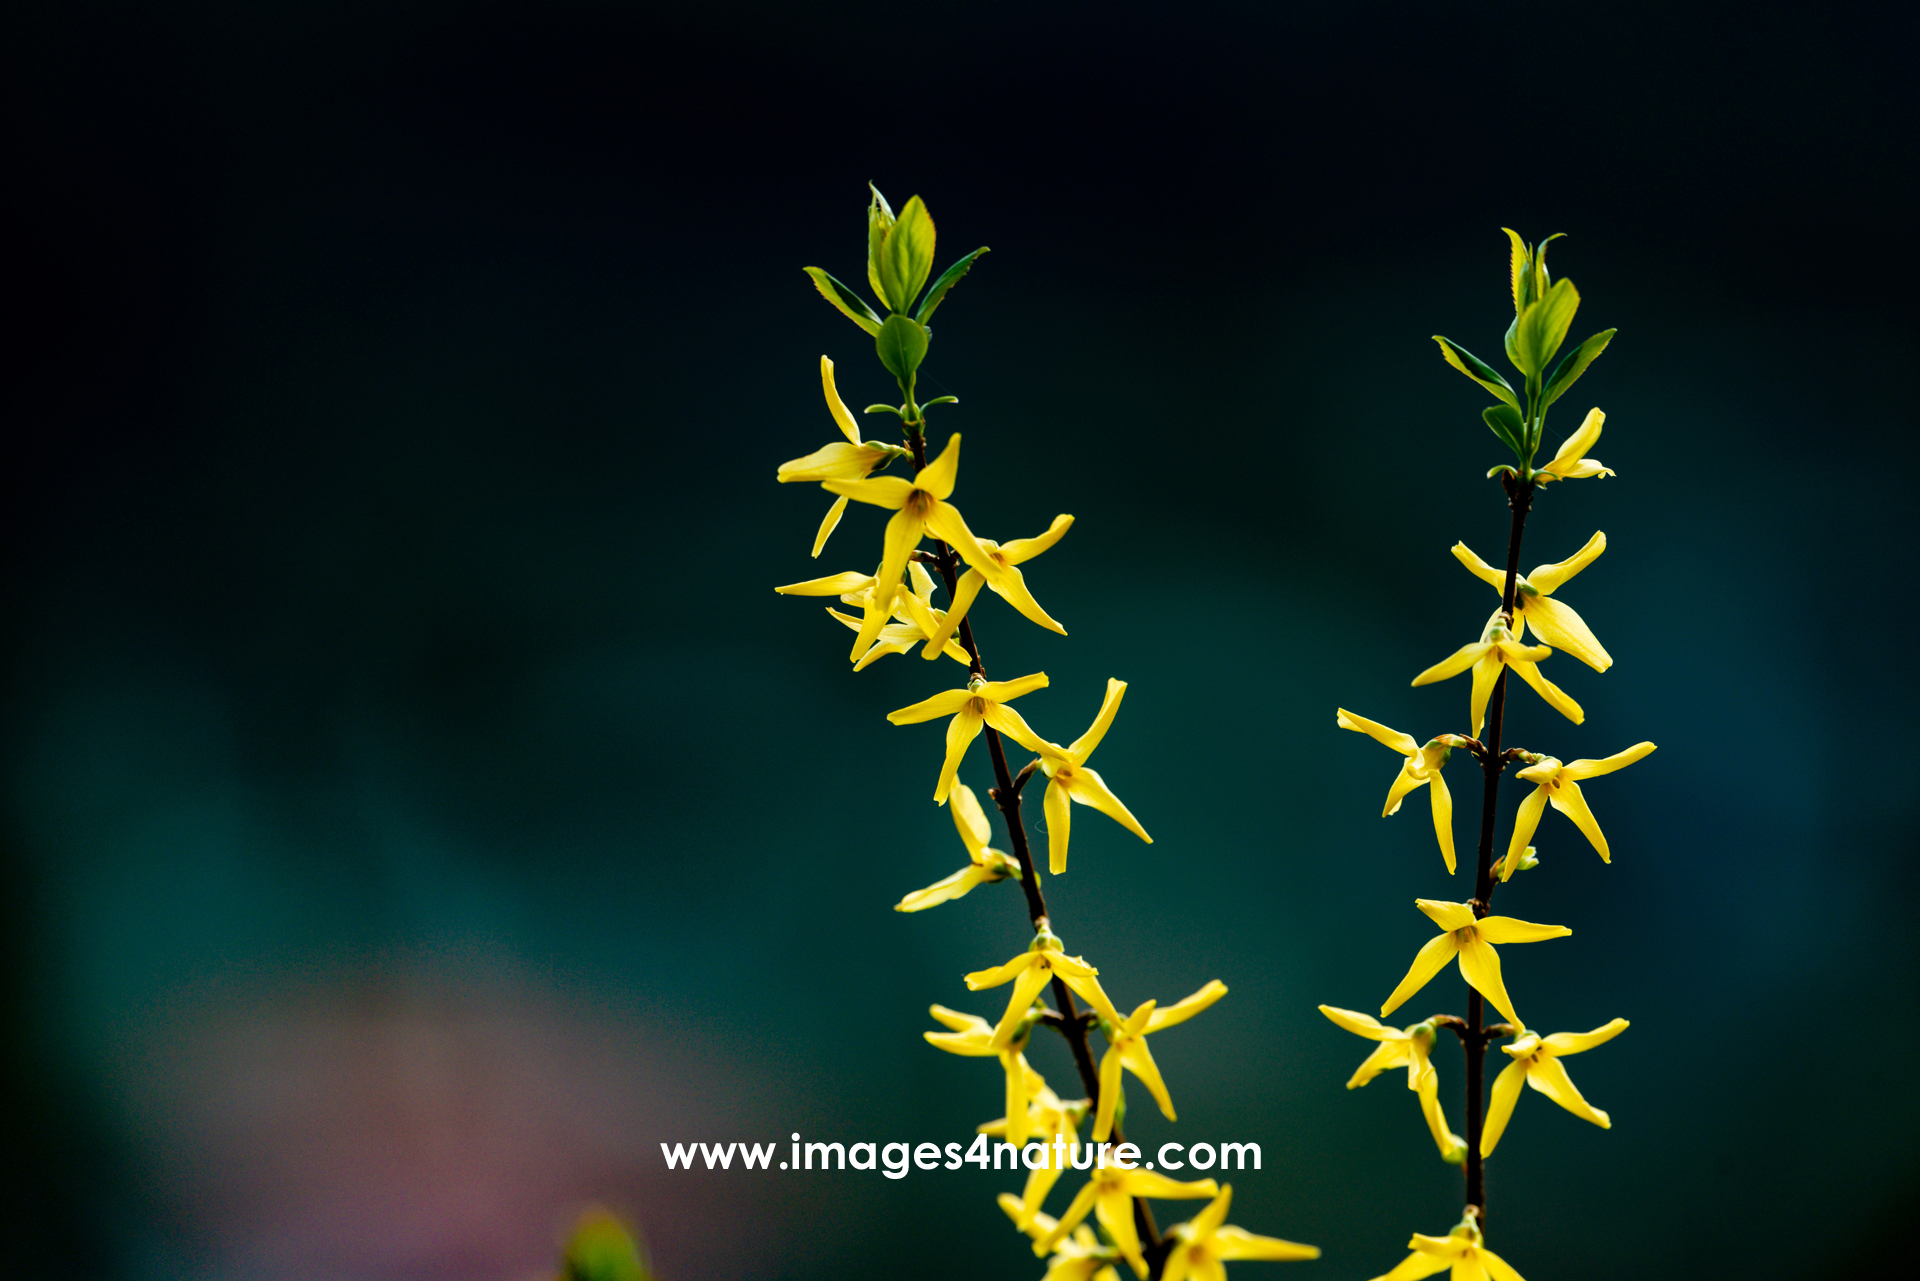 Closeup of blooming forsythia branches against dark background